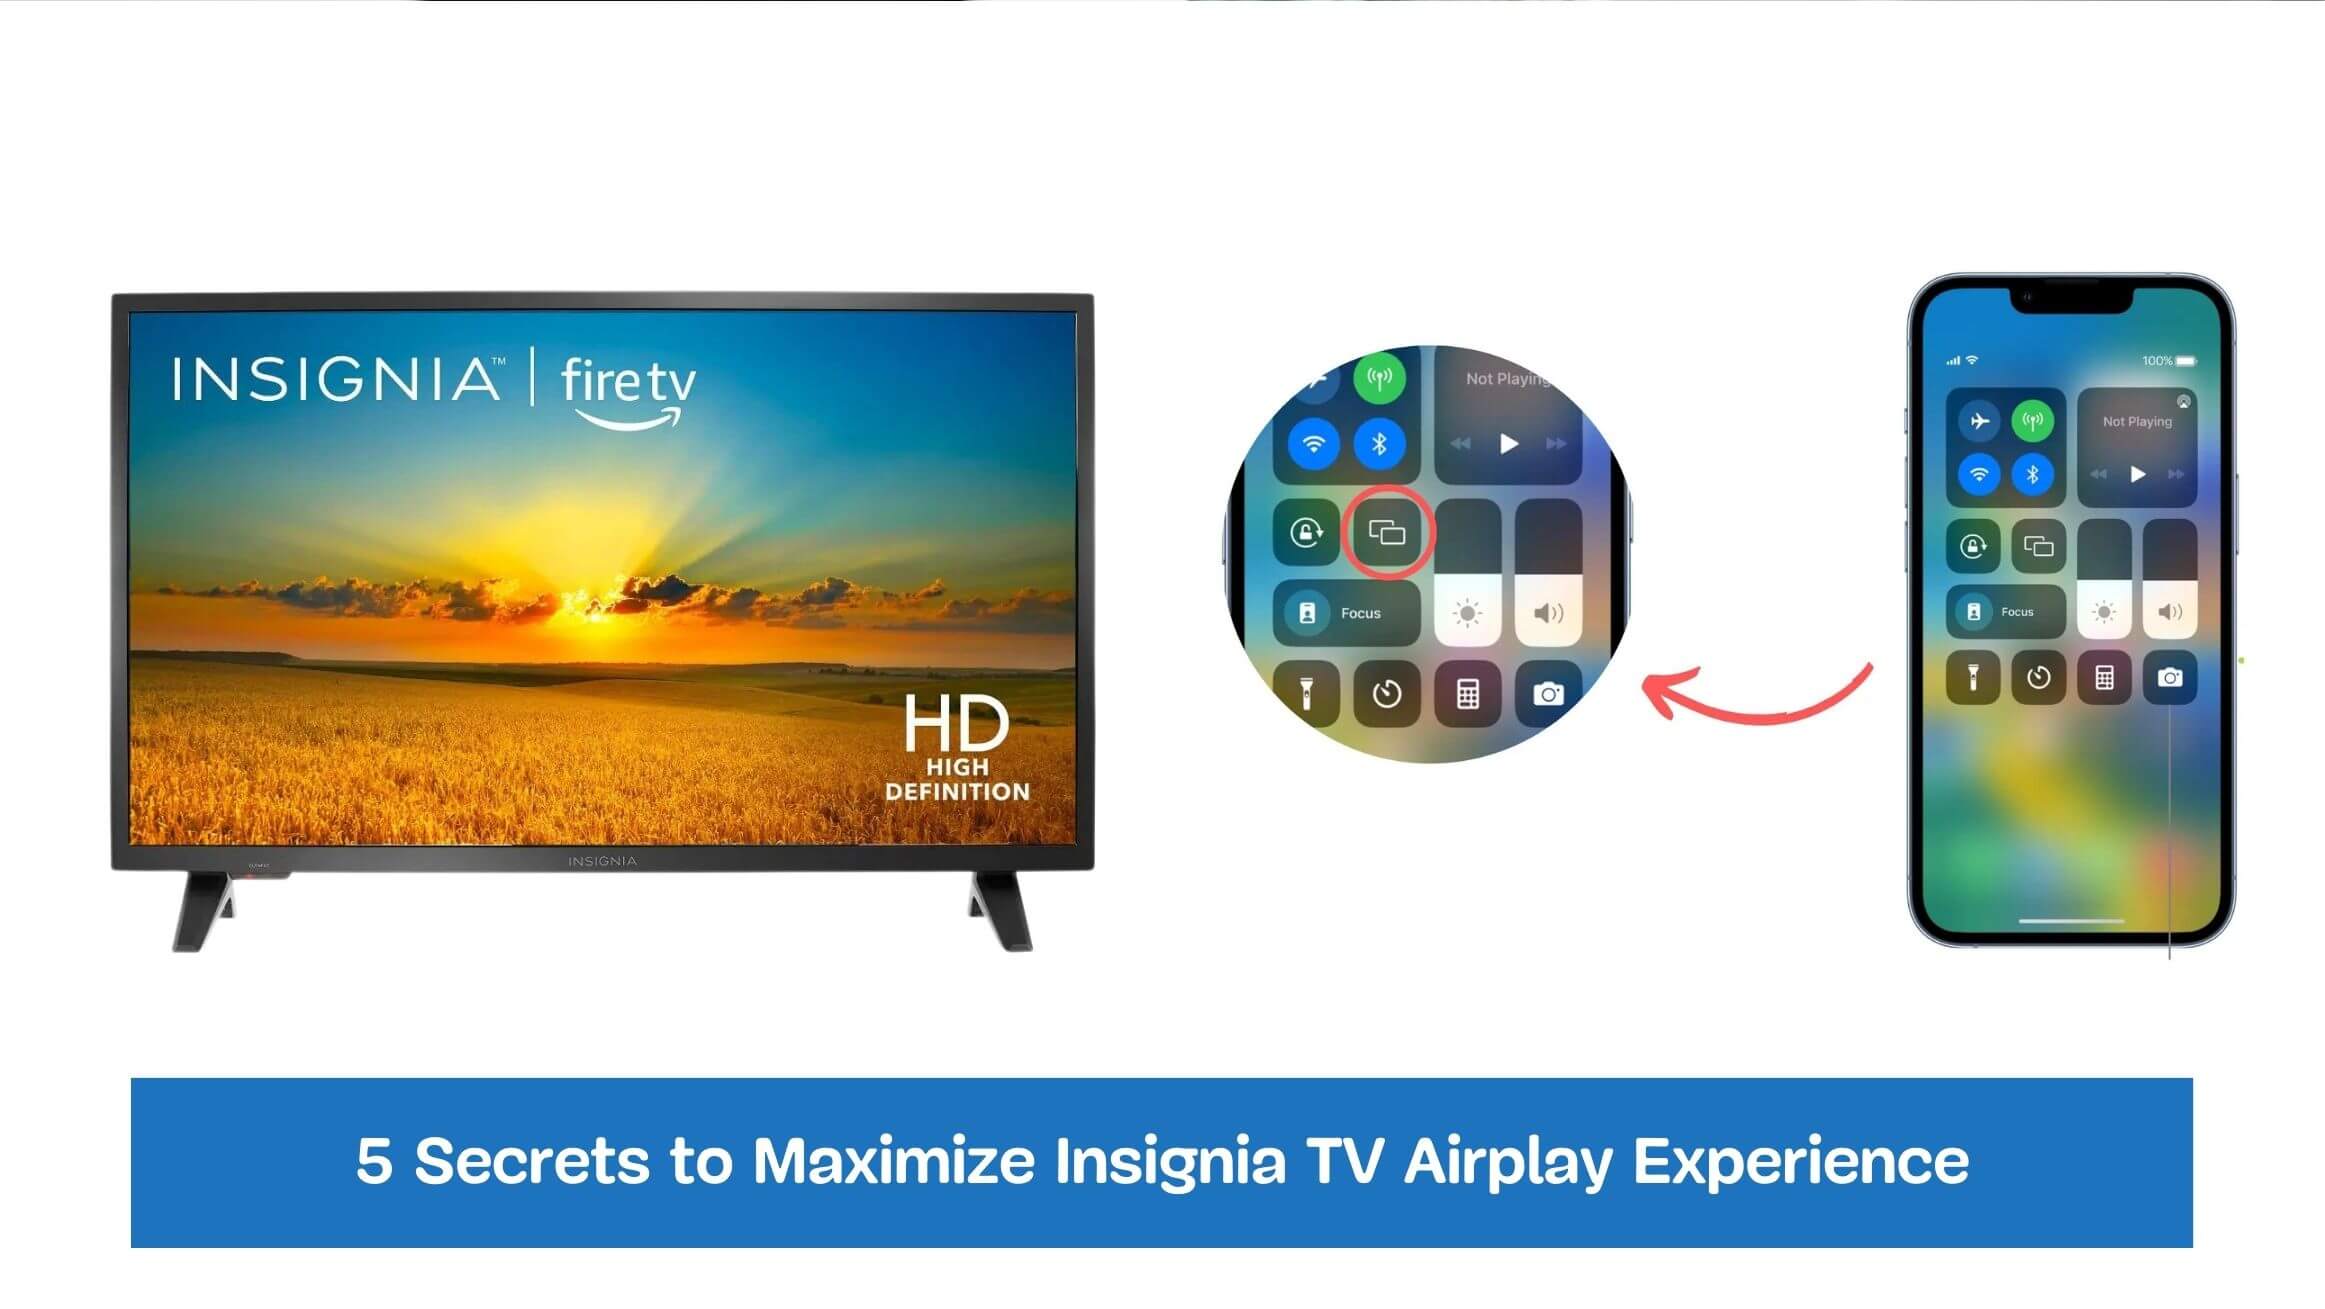 5 Secrets to Maximize Insignia TV Airplay Experience